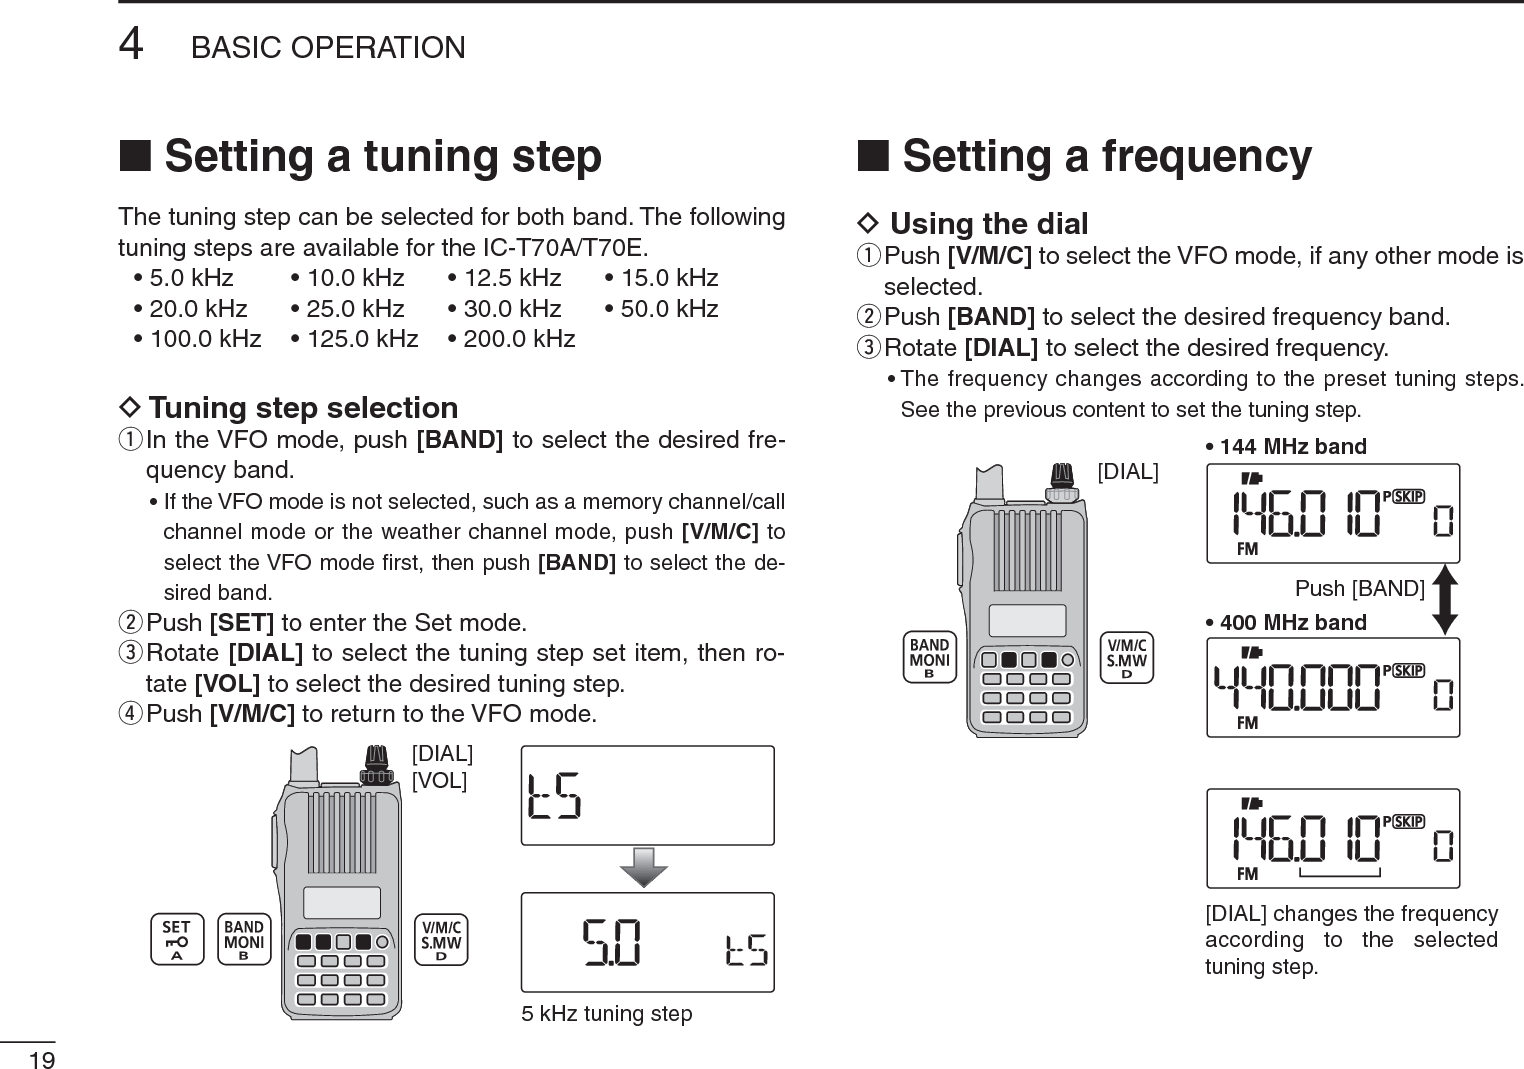 194BASIC OPERATIONN Setting a tuning stepThe tuning step can be selected for both band. The following tuning steps are available for the IC-T70A/T70E.• 5.0 kHz • 10.0 kHz • 12.5 kHz • 15.0 kHz• 20.0 kHz • 25.0 kHz • 30.0 kHz • 50.0 kHz• 100.0 kHz • 125.0 kHz • 200.0 kHzD Tuning step selectionq  In the VFO mode, push [BAND] to select the desired fre-quency band.• If the VFO mode is not selected, such as a memory channel/call channel mode or the weather channel mode, push [V/M/C] to select the VFO mode ﬁrst, then push [BAND] to select the de-sired band.w  Push [SET] to enter the Set mode.e  Rotate [DIAL] to select the tuning step set item, then ro-tate [VOL] to select the desired tuning step.rPush [V/M/C] to return to the VFO mode.[VOL][DIAL]5 kHz tuning stepN Setting a frequencyD Using the dialq  Push [V/M/C] to select the VFO mode, if any other mode is selected.w  Push [BAND] to select the desired frequency band.eRotate [DIAL] to select the desired frequency.• The frequency changes according to the preset tuning steps. See the previous content to set the tuning step.[DIAL][DIAL] changes the frequencyaccording to the selectedtuning step.• 144 MHz band• 400 MHz bandPush [BAND]